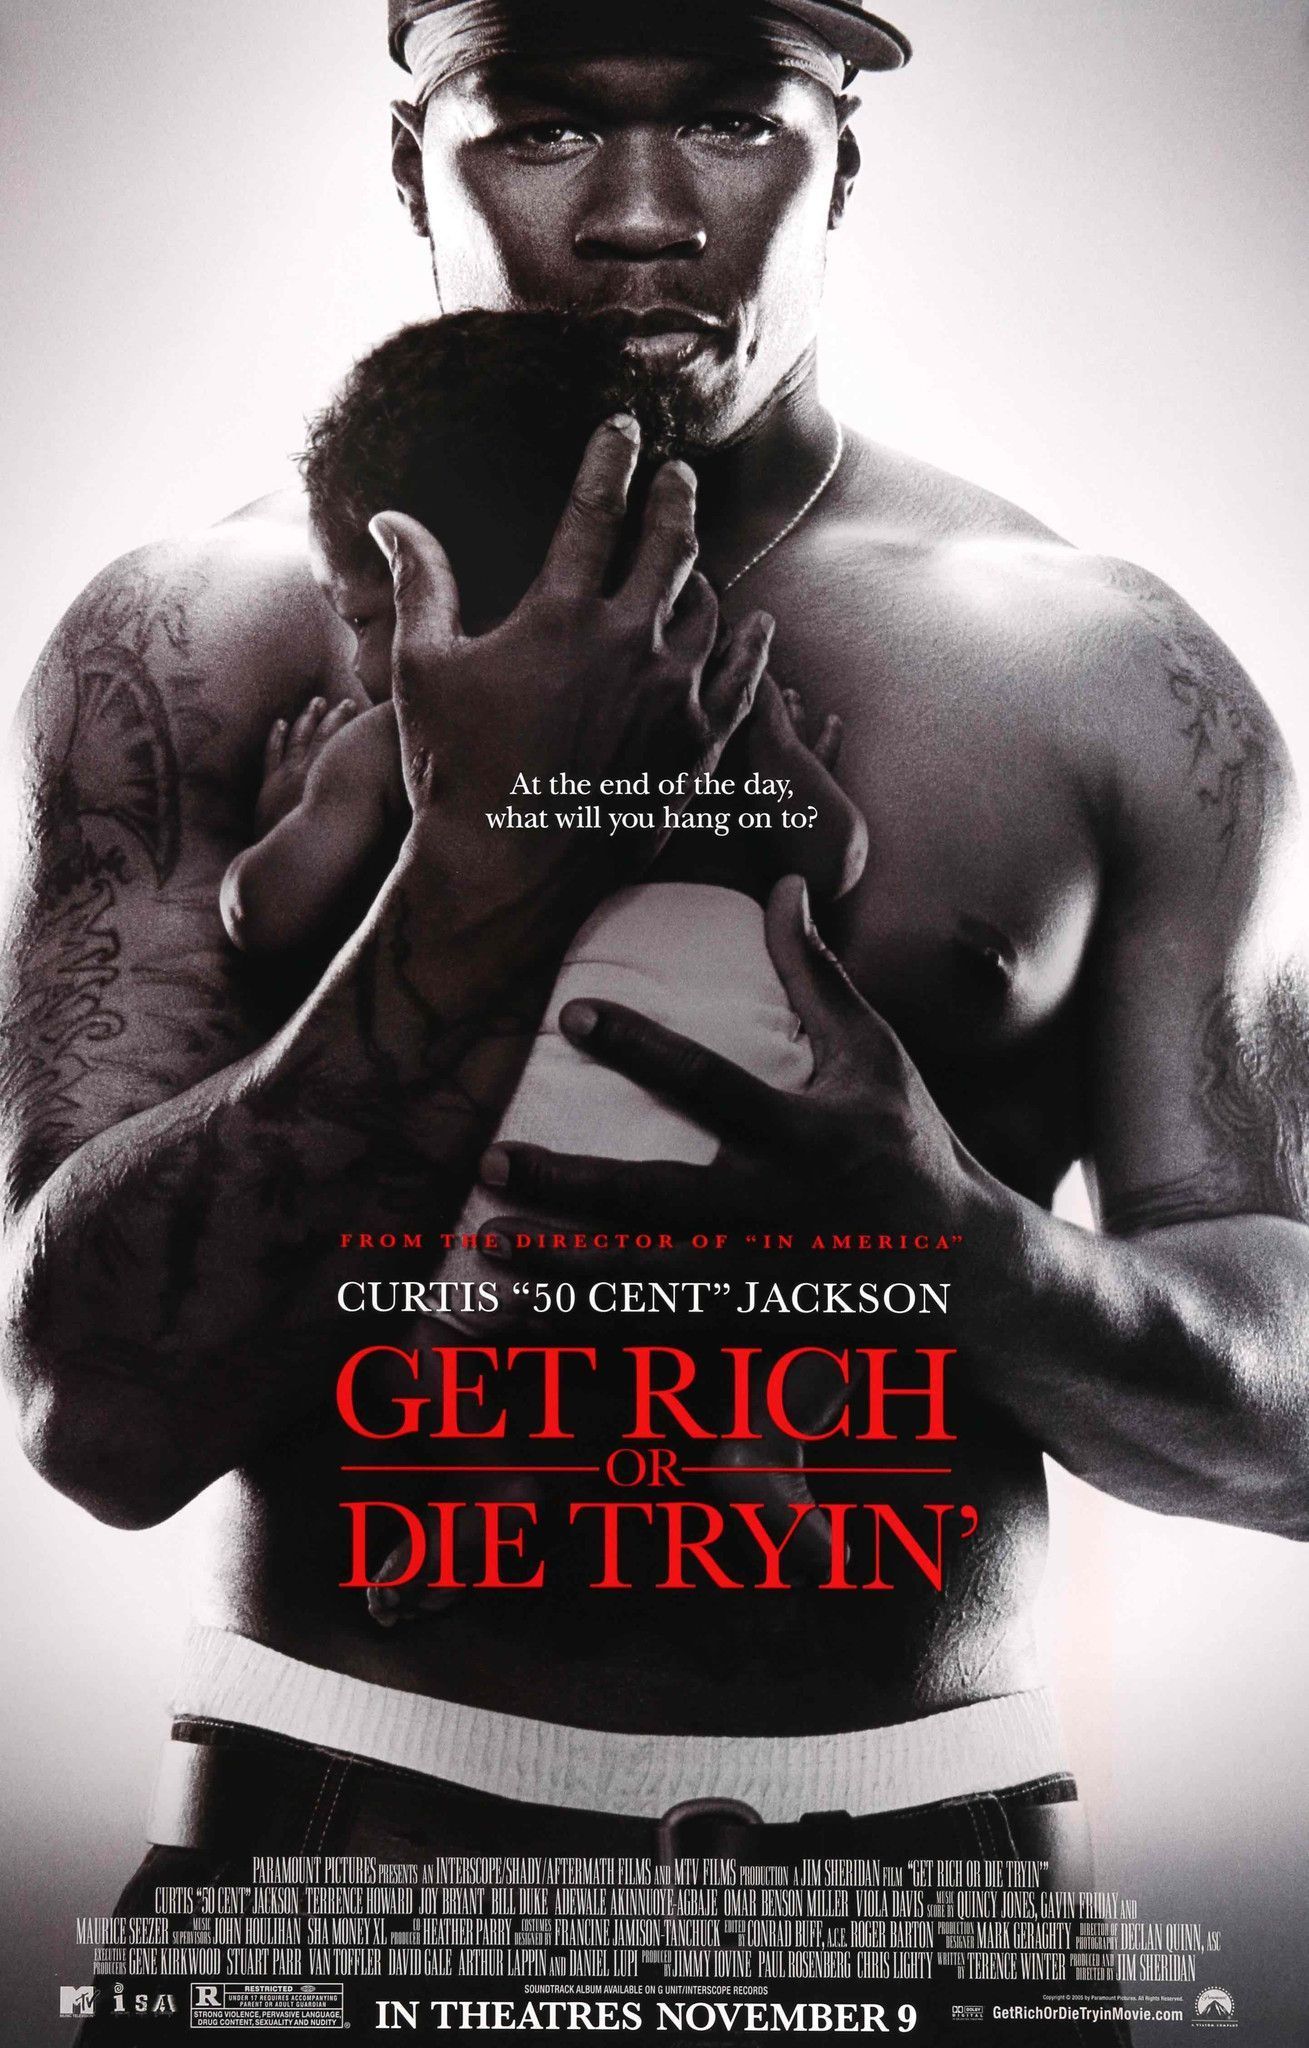 Get Rich or Die Tryin streaming where to watch online